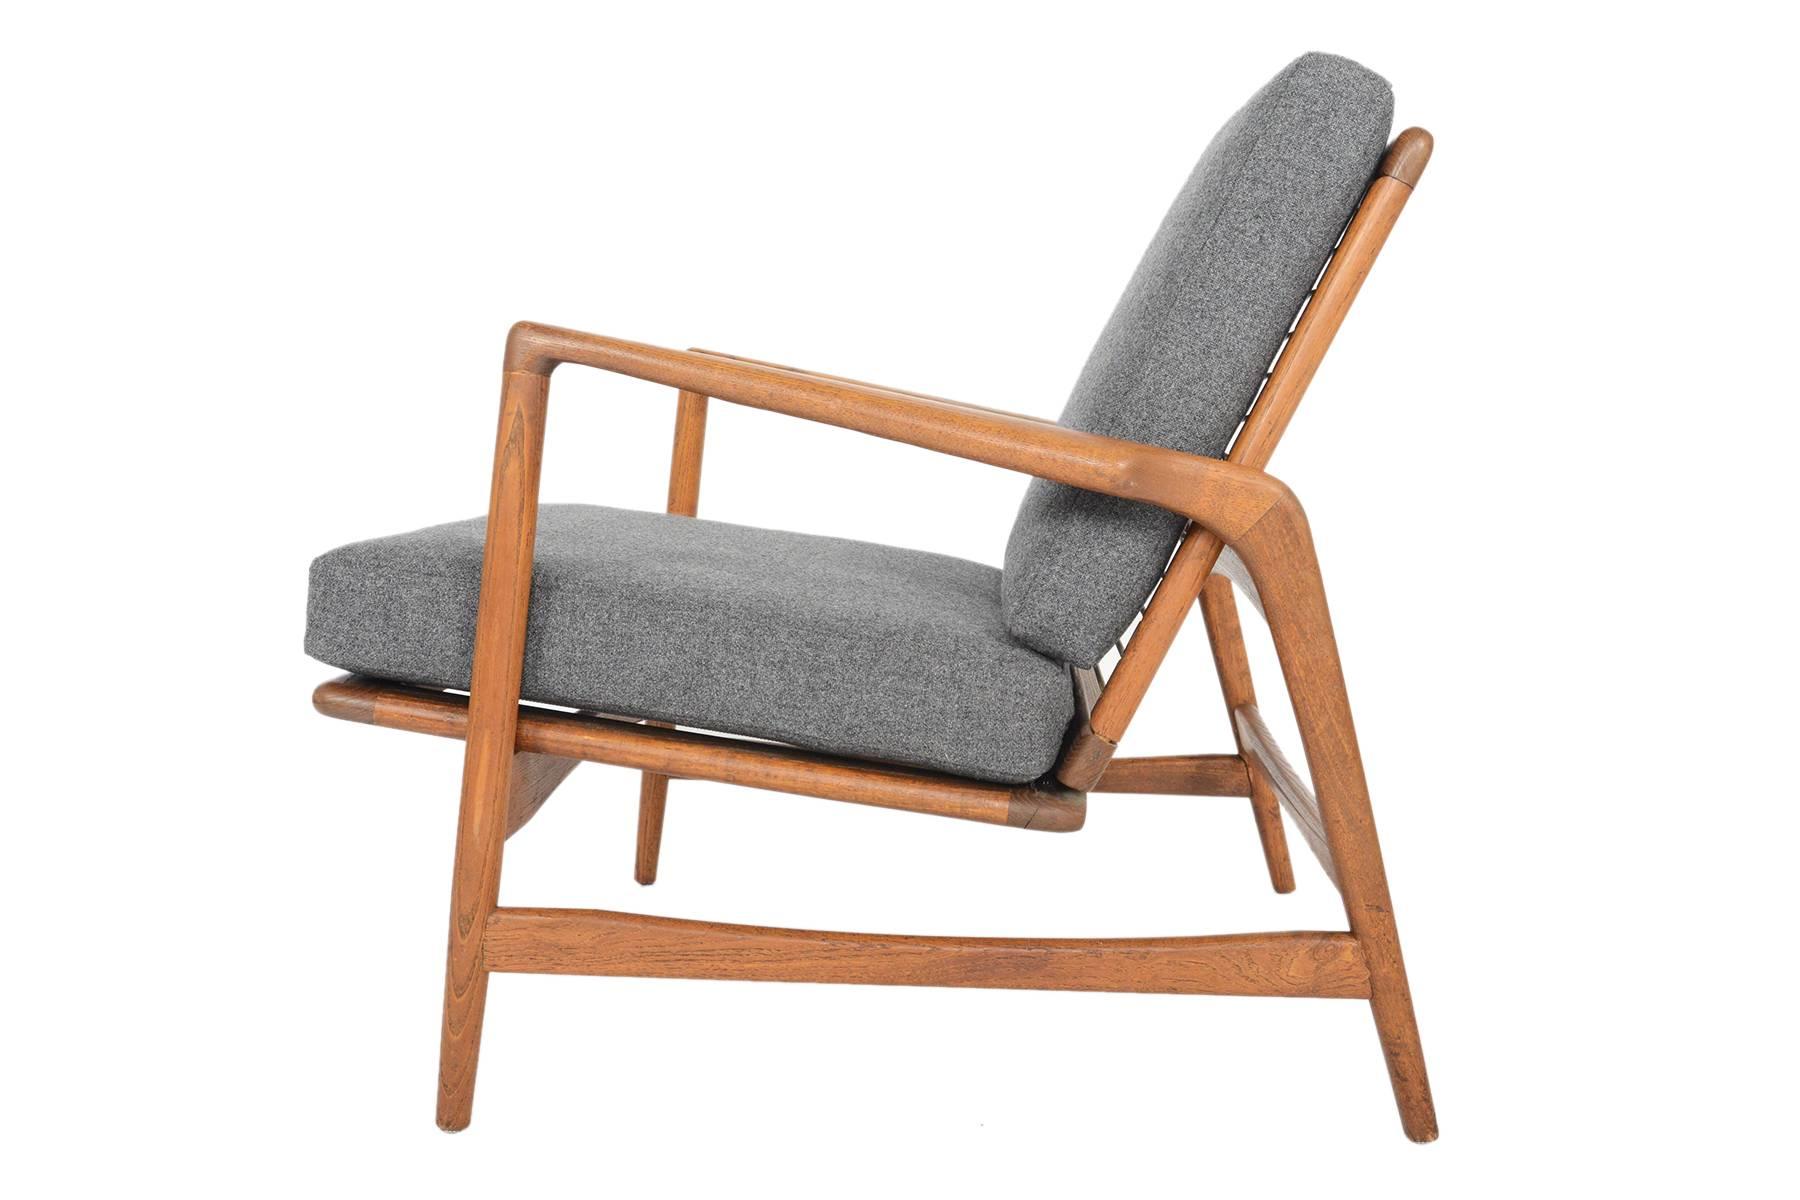 This Danish Modern lounge chair designed by Ib Kofod Larsen for Selig offers the clean lines of a truly timeless design. The gorgeous quarter-sawn oak frame and seamless joinery sets this chair apart. Recently upholstered in grey 